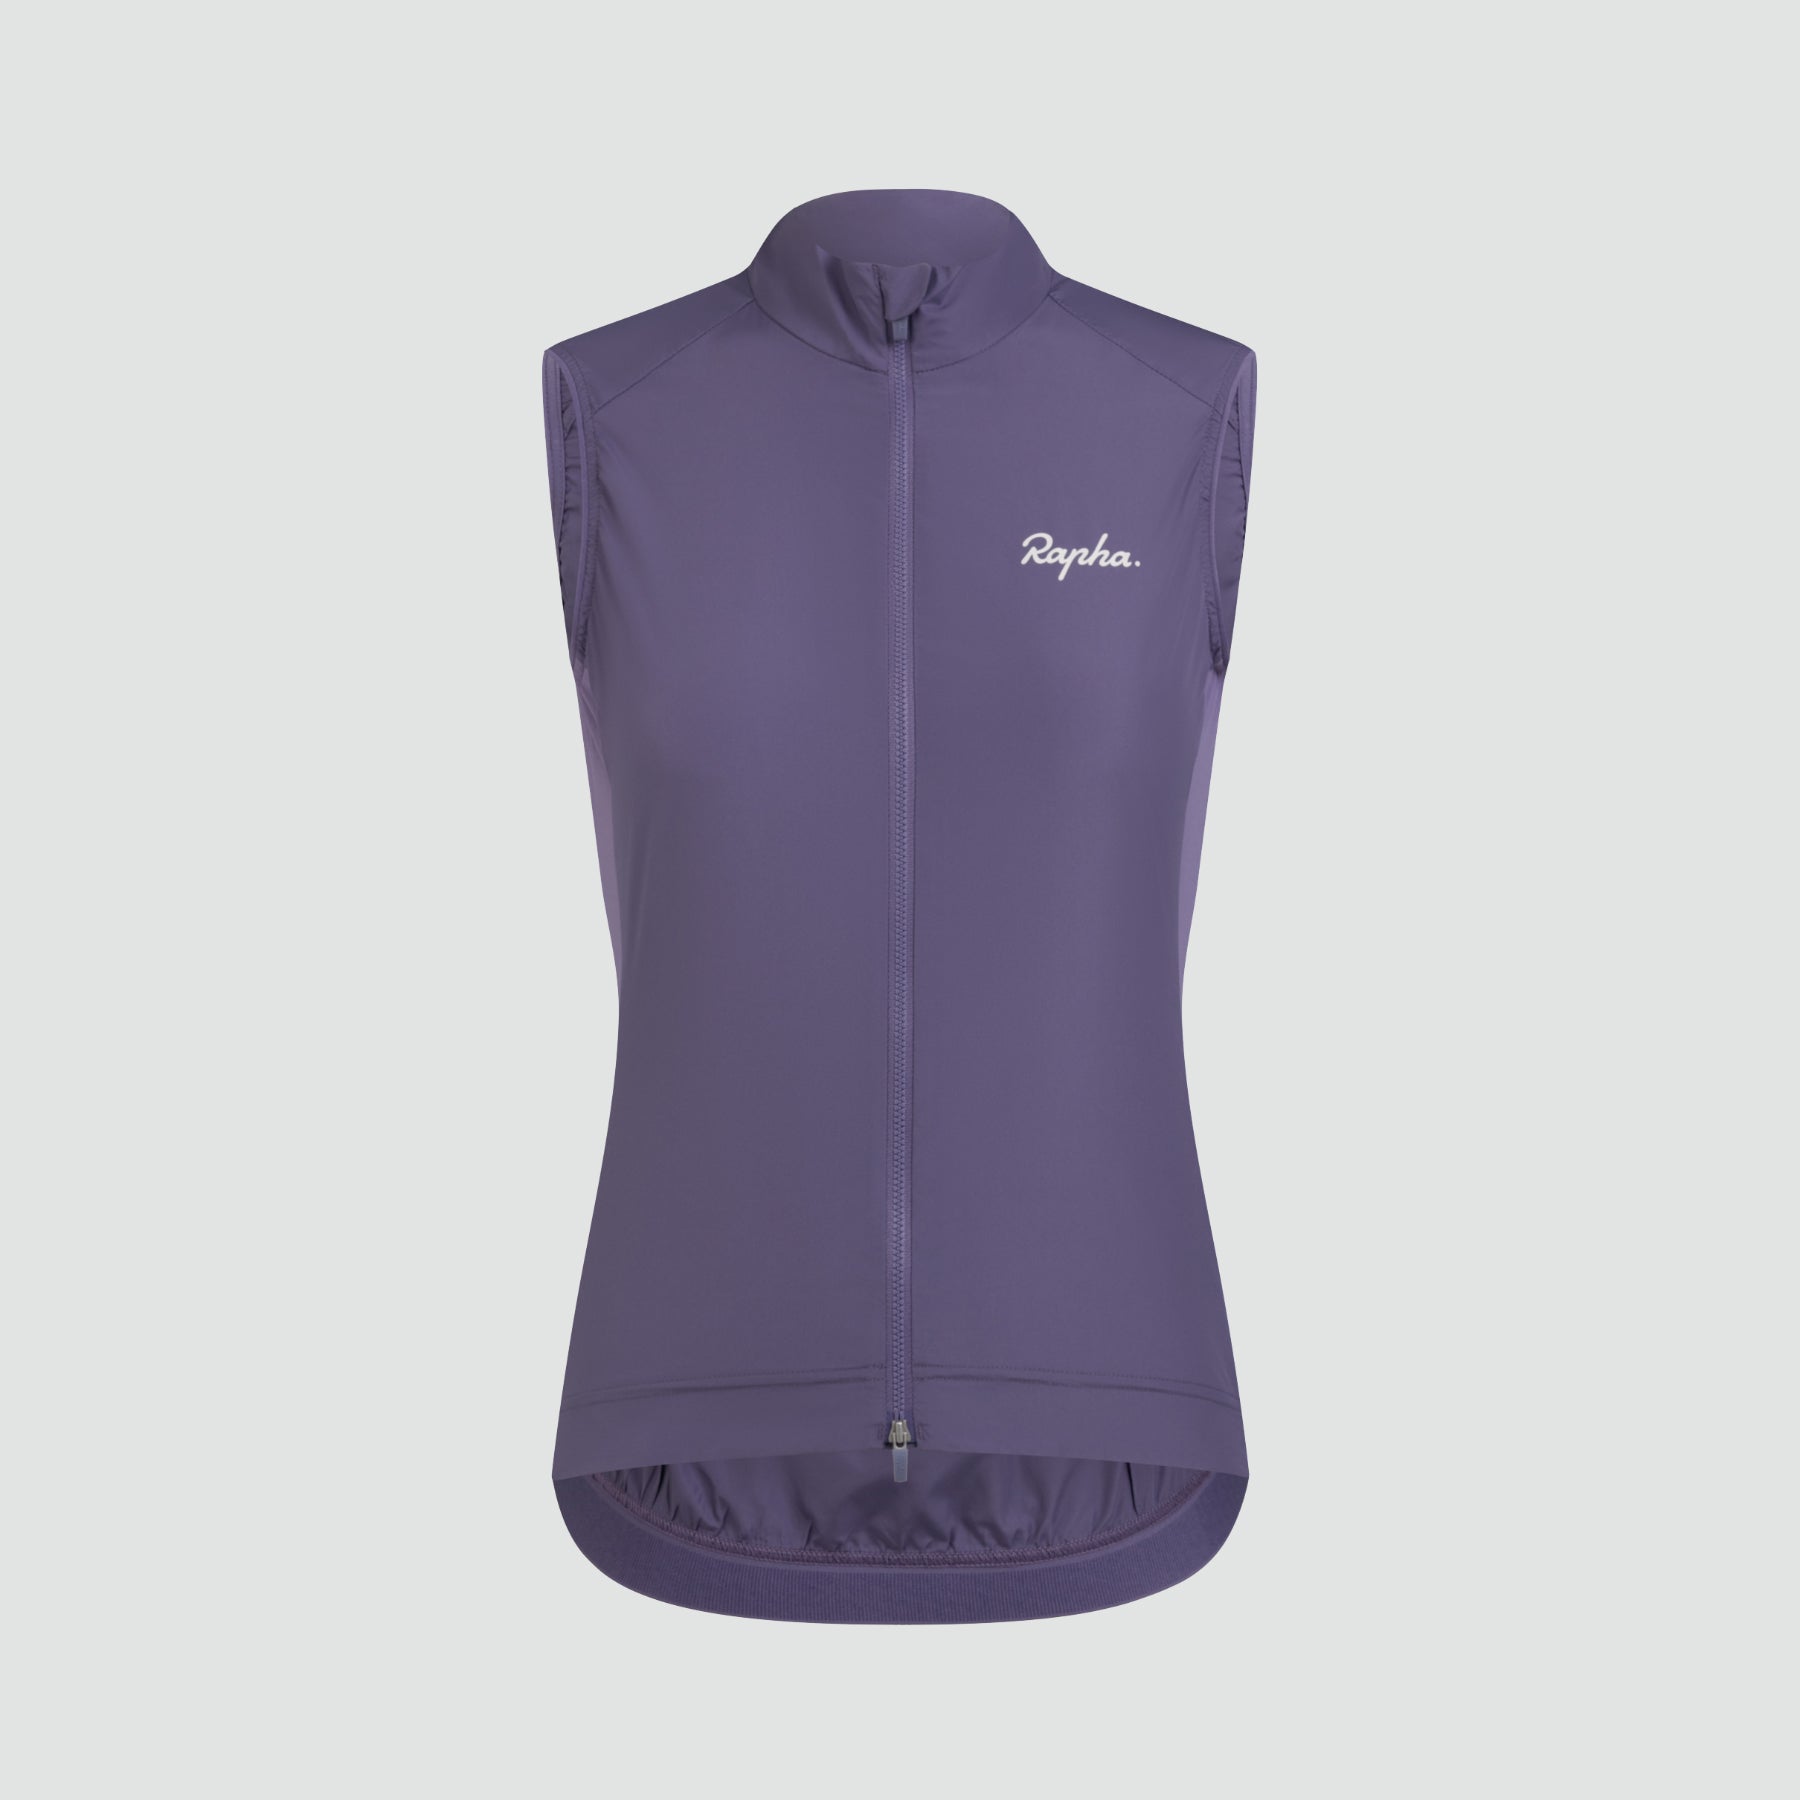 Gilet Core Femme - Dusted Lilac/White